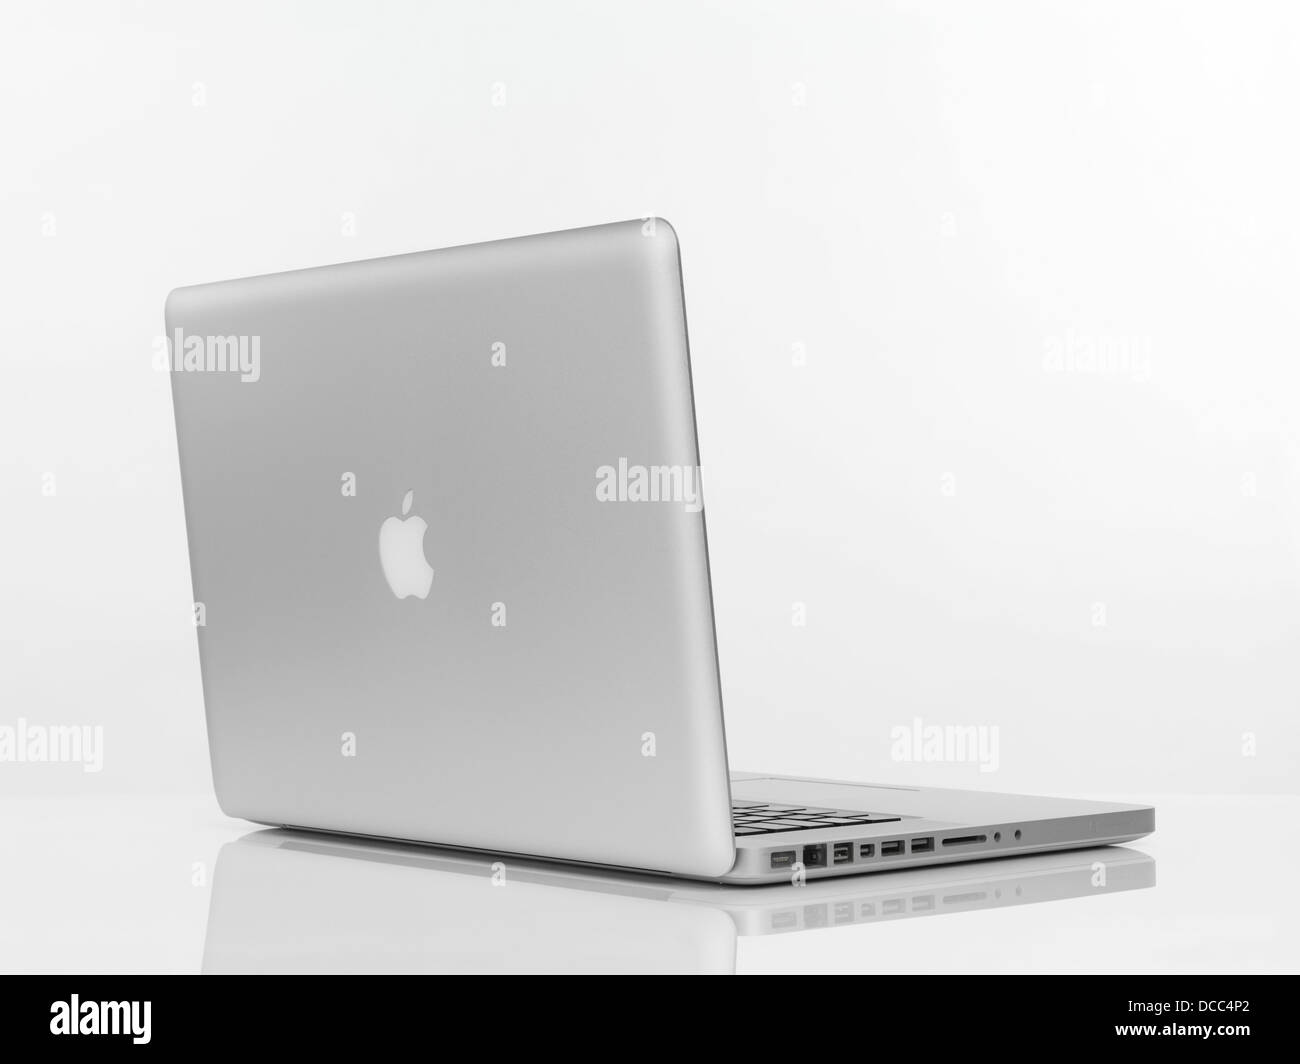 Macbook Pro laptop computer rear view with Apple logo on the lid isolated on white background Stock Photo